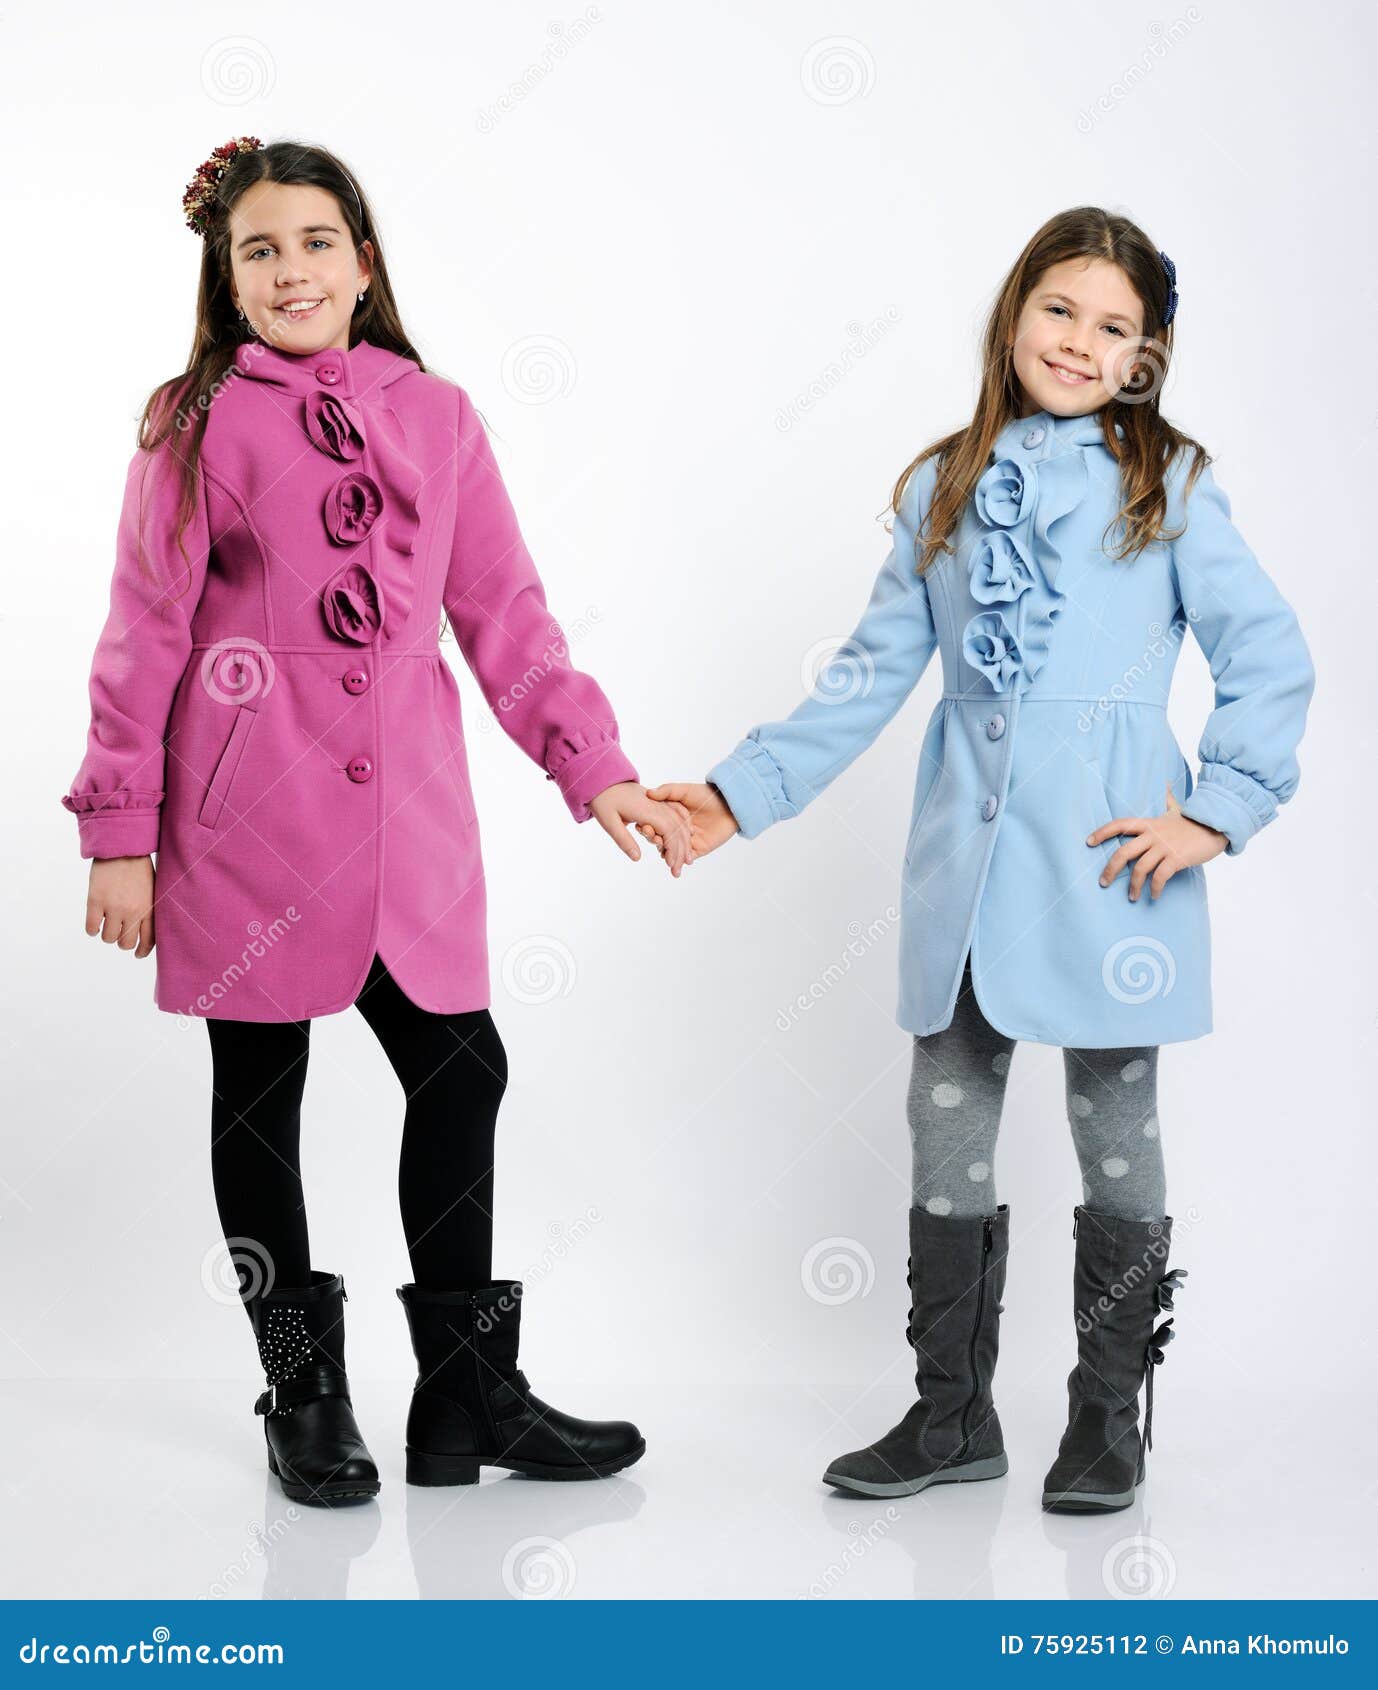 girls in the bright coats